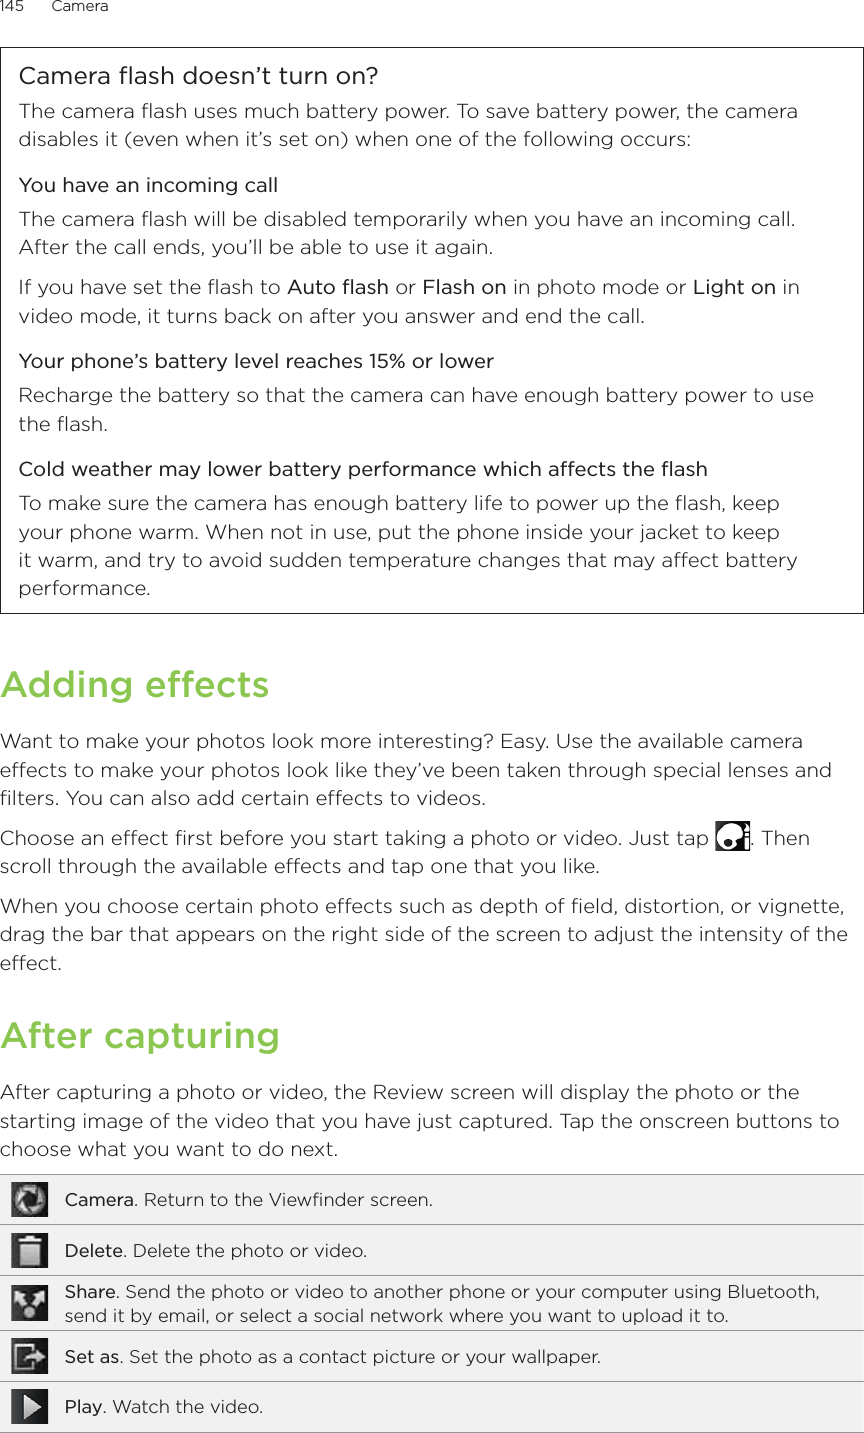 145      Camera      Camera flash doesn’t turn on?The camera flash uses much battery power. To save battery power, the camera disables it (even when it’s set on) when one of the following occurs:You have an incoming callThe camera flash will be disabled temporarily when you have an incoming call. After the call ends, you’ll be able to use it again.If you have set the flash to Auto flash or Flash on in photo mode or Light on in video mode, it turns back on after you answer and end the call.Your phone’s battery level reaches 15% or lowerRecharge the battery so that the camera can have enough battery power to use the flash.Cold weather may lower battery performance which affects the flashTo make sure the camera has enough battery life to power up the flash, keep your phone warm. When not in use, put the phone inside your jacket to keep it warm, and try to avoid sudden temperature changes that may affect battery performance.Adding effectsWant to make your photos look more interesting? Easy. Use the available camera effects to make your photos look like they’ve been taken through special lenses and filters. You can also add certain effects to videos.Choose an effect first before you start taking a photo or video. Just tap  . Then scroll through the available effects and tap one that you like.When you choose certain photo effects such as depth of field, distortion, or vignette, drag the bar that appears on the right side of the screen to adjust the intensity of the effect.After capturingAfter capturing a photo or video, the Review screen will display the photo or the starting image of the video that you have just captured. Tap the onscreen buttons to choose what you want to do next.Camera. Return to the Viewfinder screen.Delete. Delete the photo or video.Share. Send the photo or video to another phone or your computer using Bluetooth, send it by email, or select a social network where you want to upload it to.Set as. Set the photo as a contact picture or your wallpaper.Play. Watch the video.